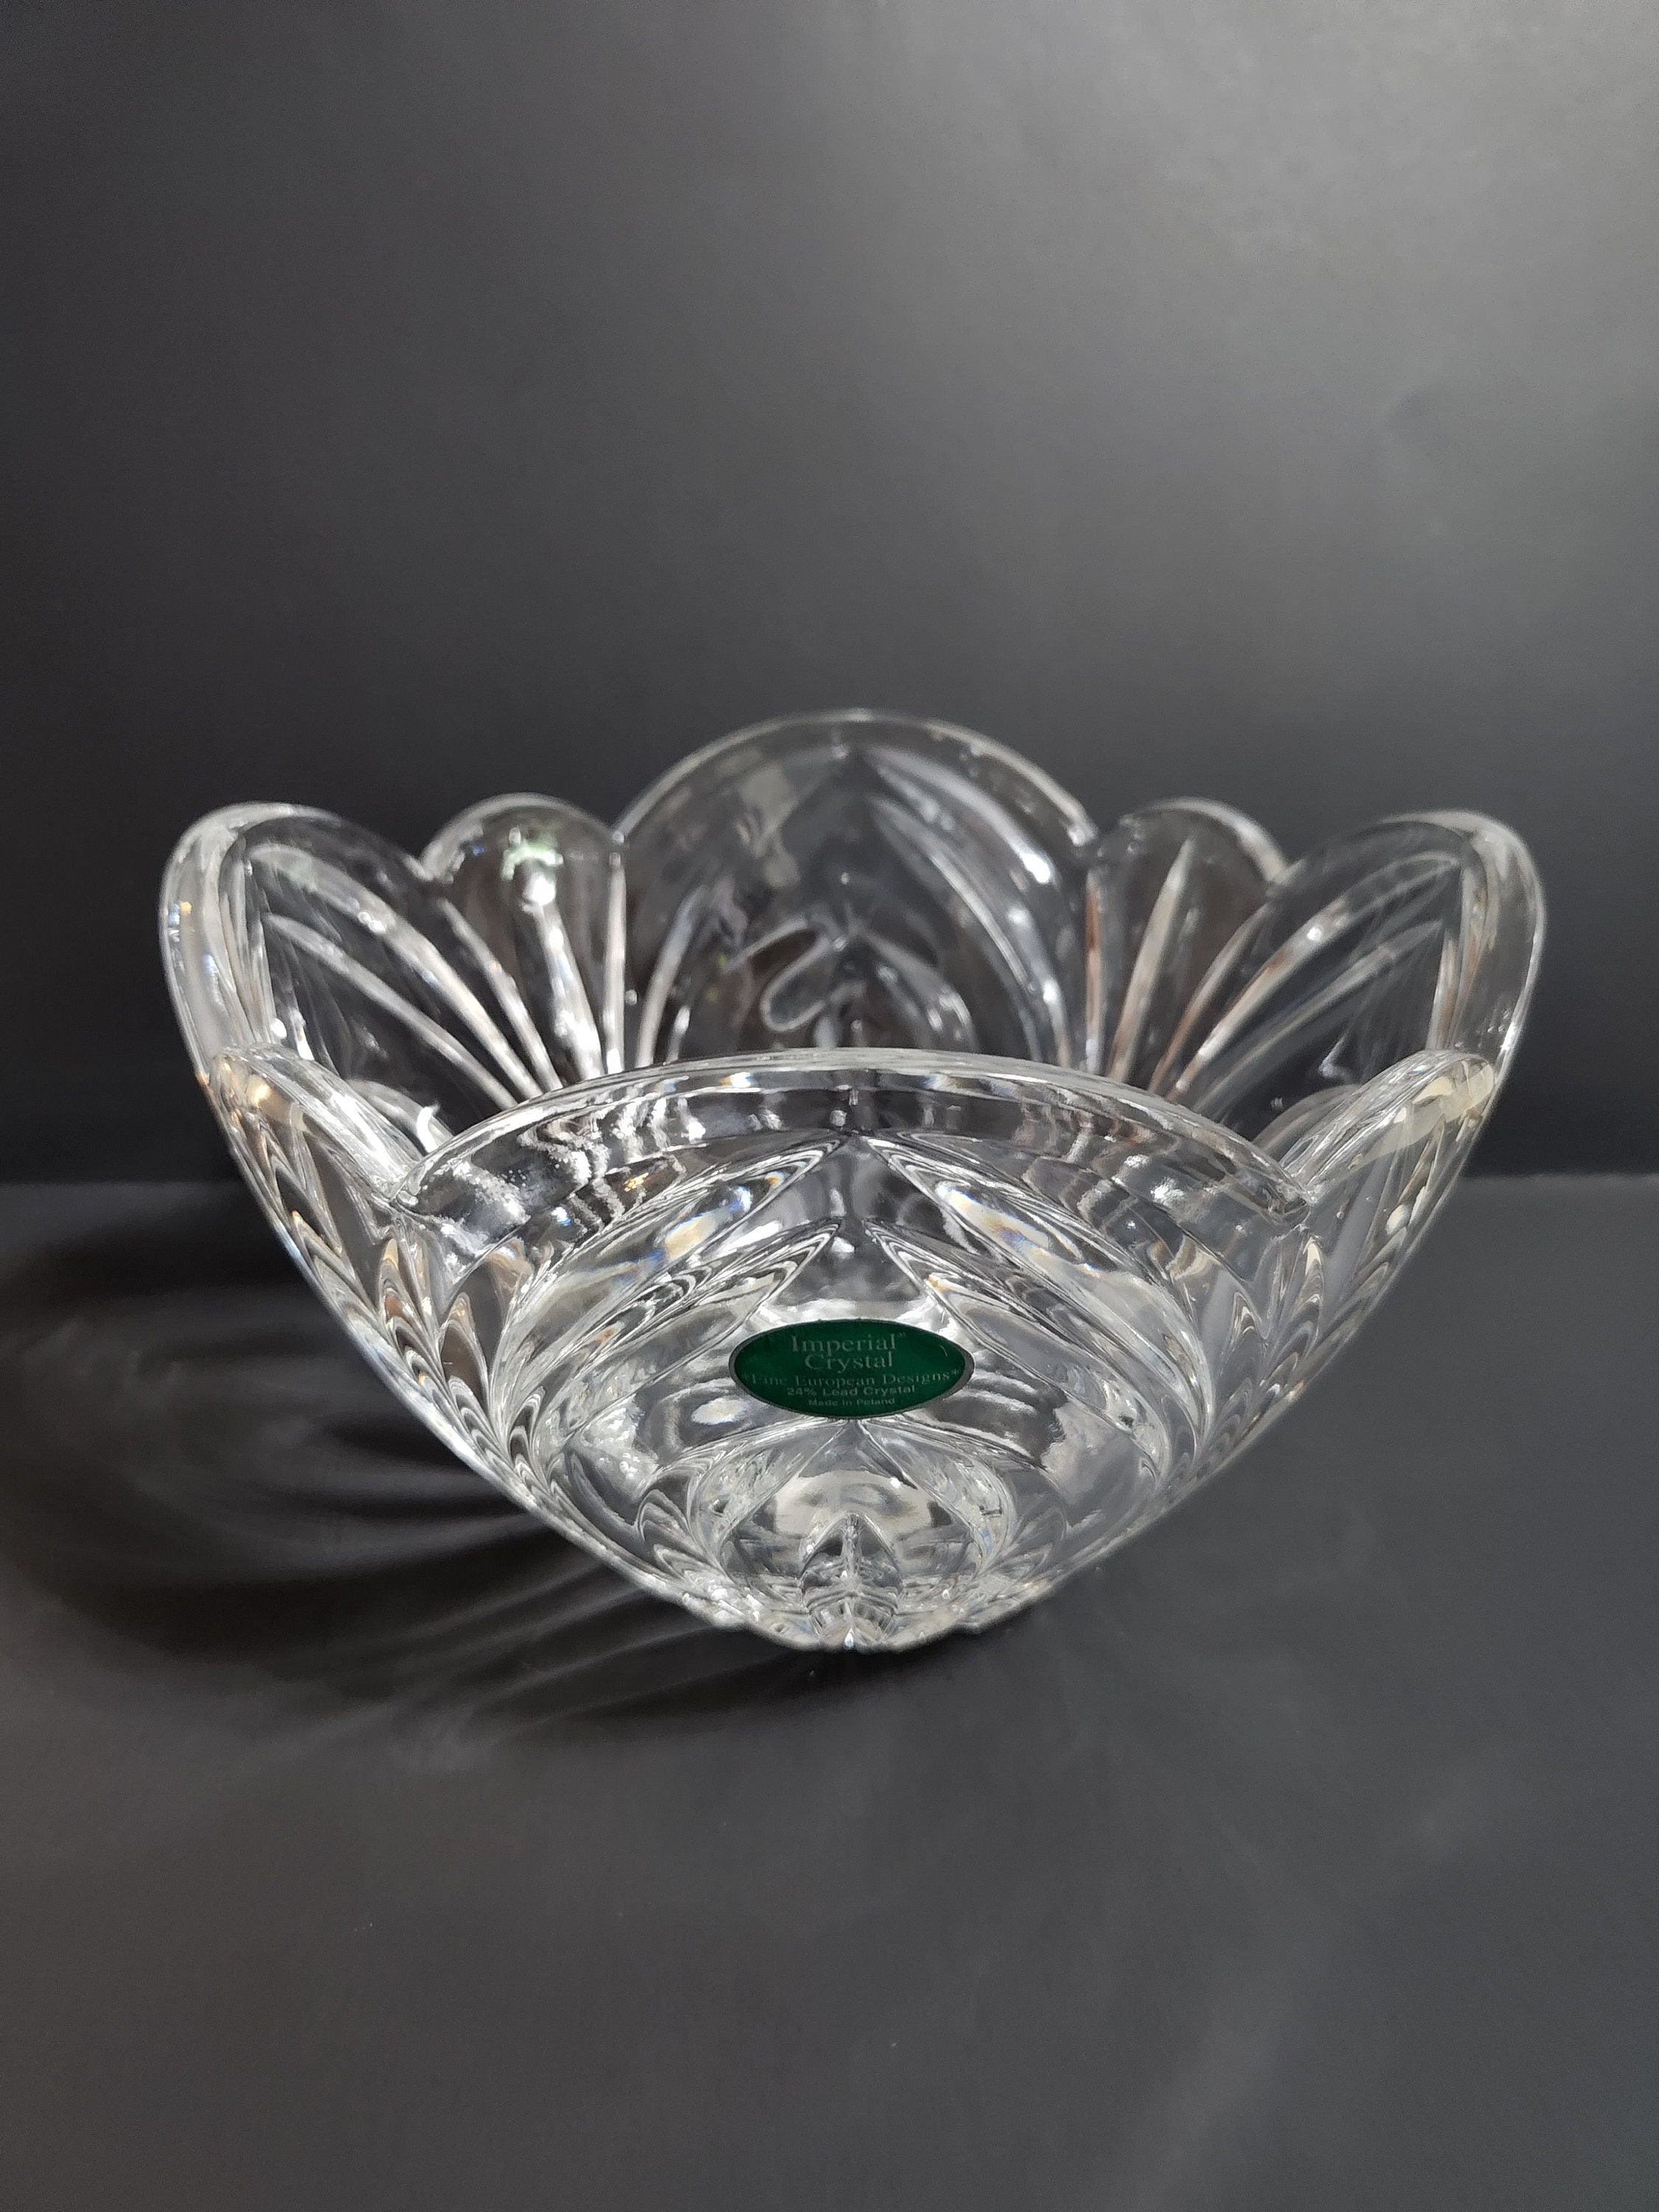 24% Lead Crystal 7 x 4 Cut Glass Bowl (Free Shipping with 6 items)